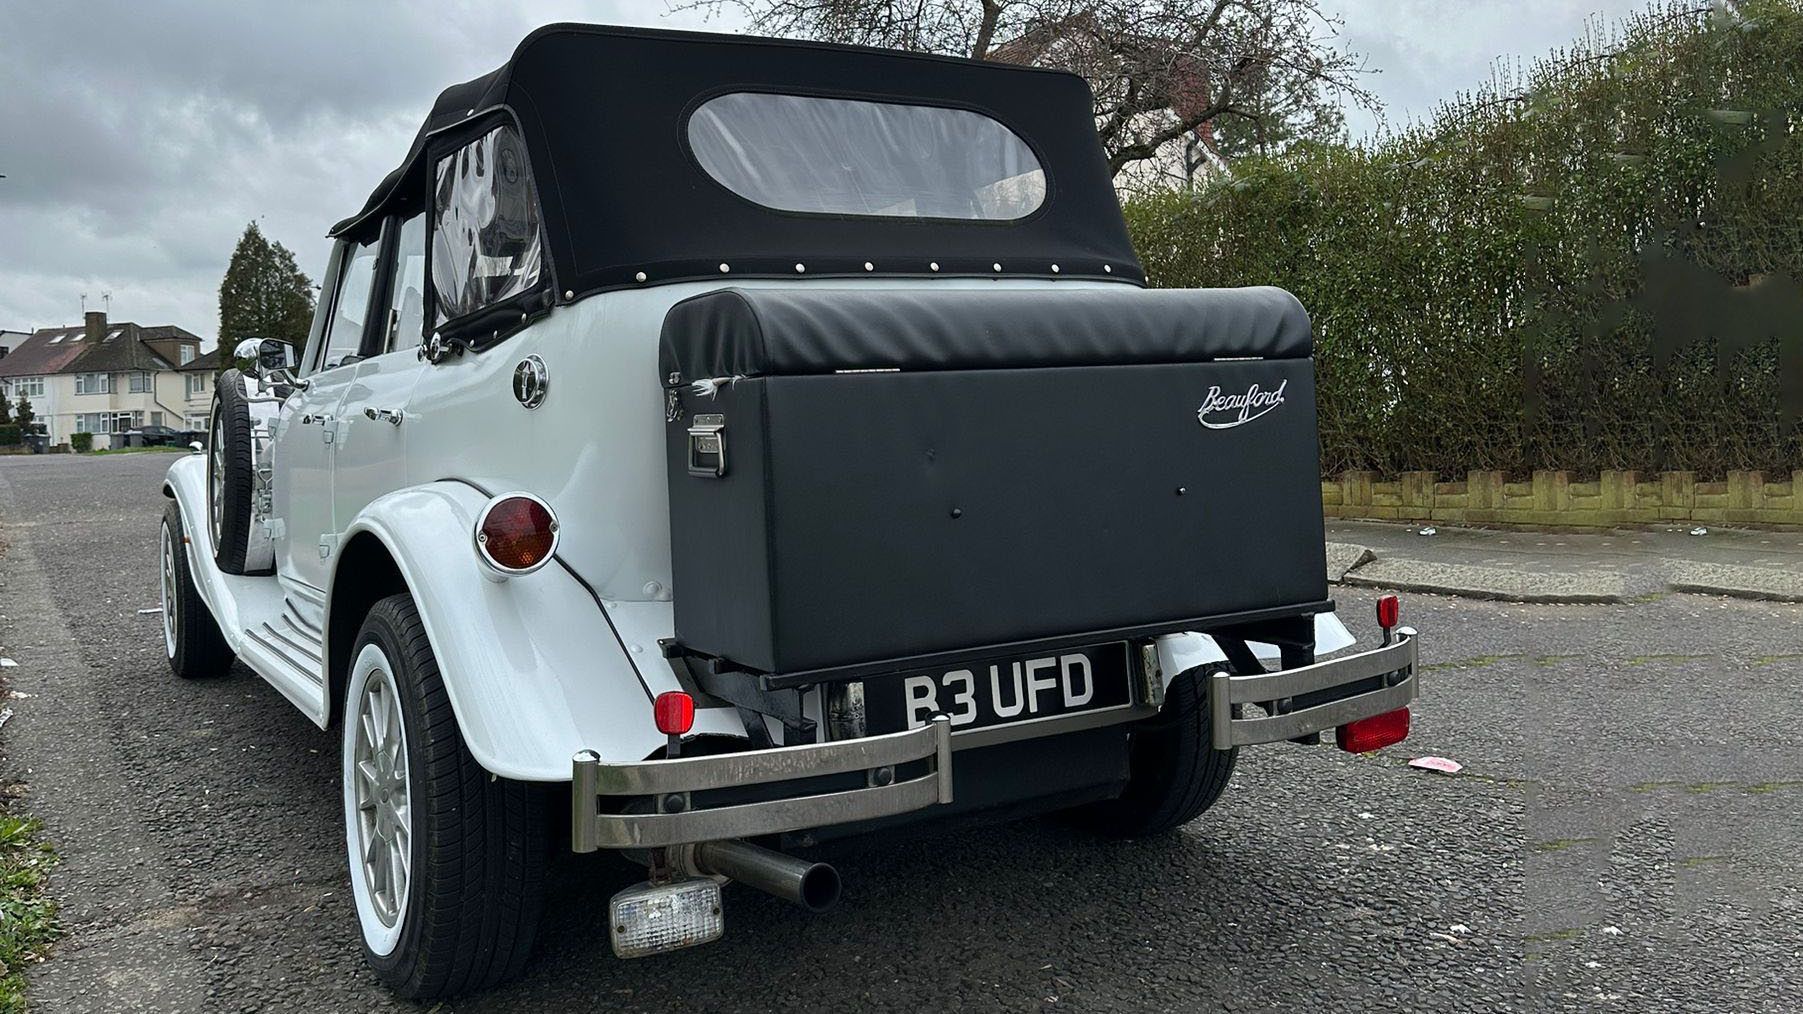 Rear view from White Beauford 4-Door Convertible with black picnis table at the rear of the vehicle